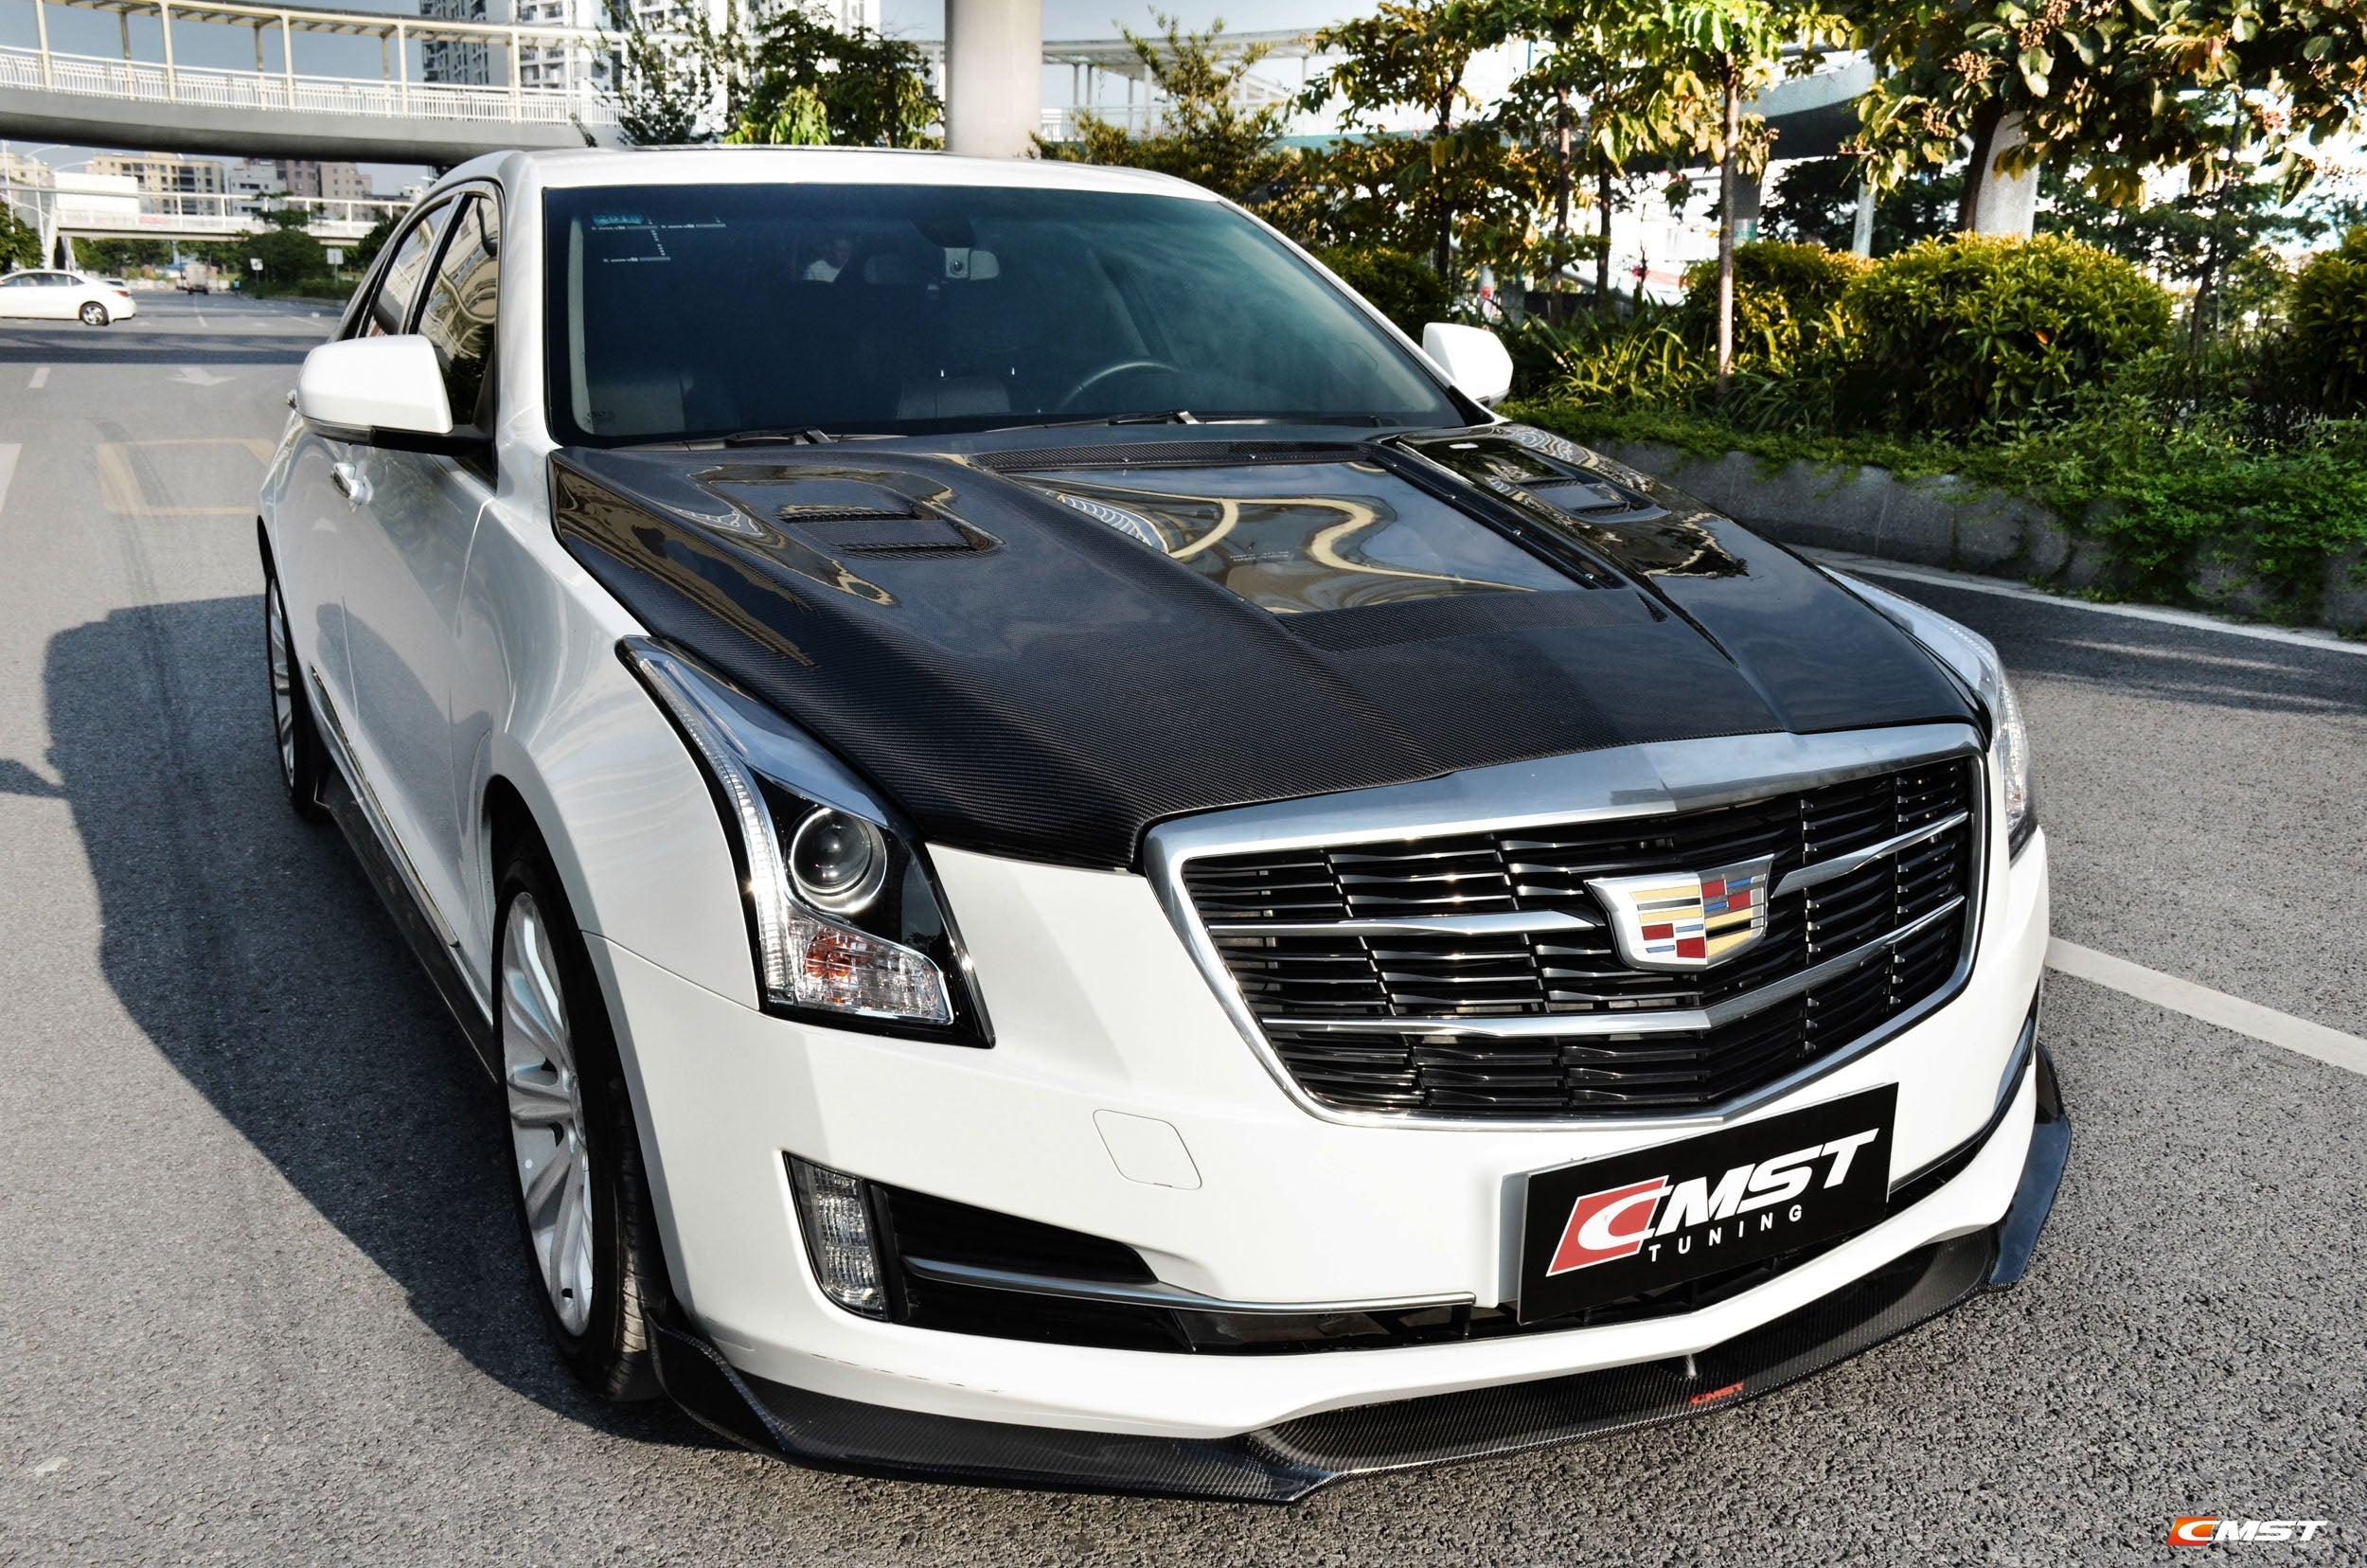 CMST Tuning Carbon Fiber Side Skirts for Cadillac ATS 2014-2016